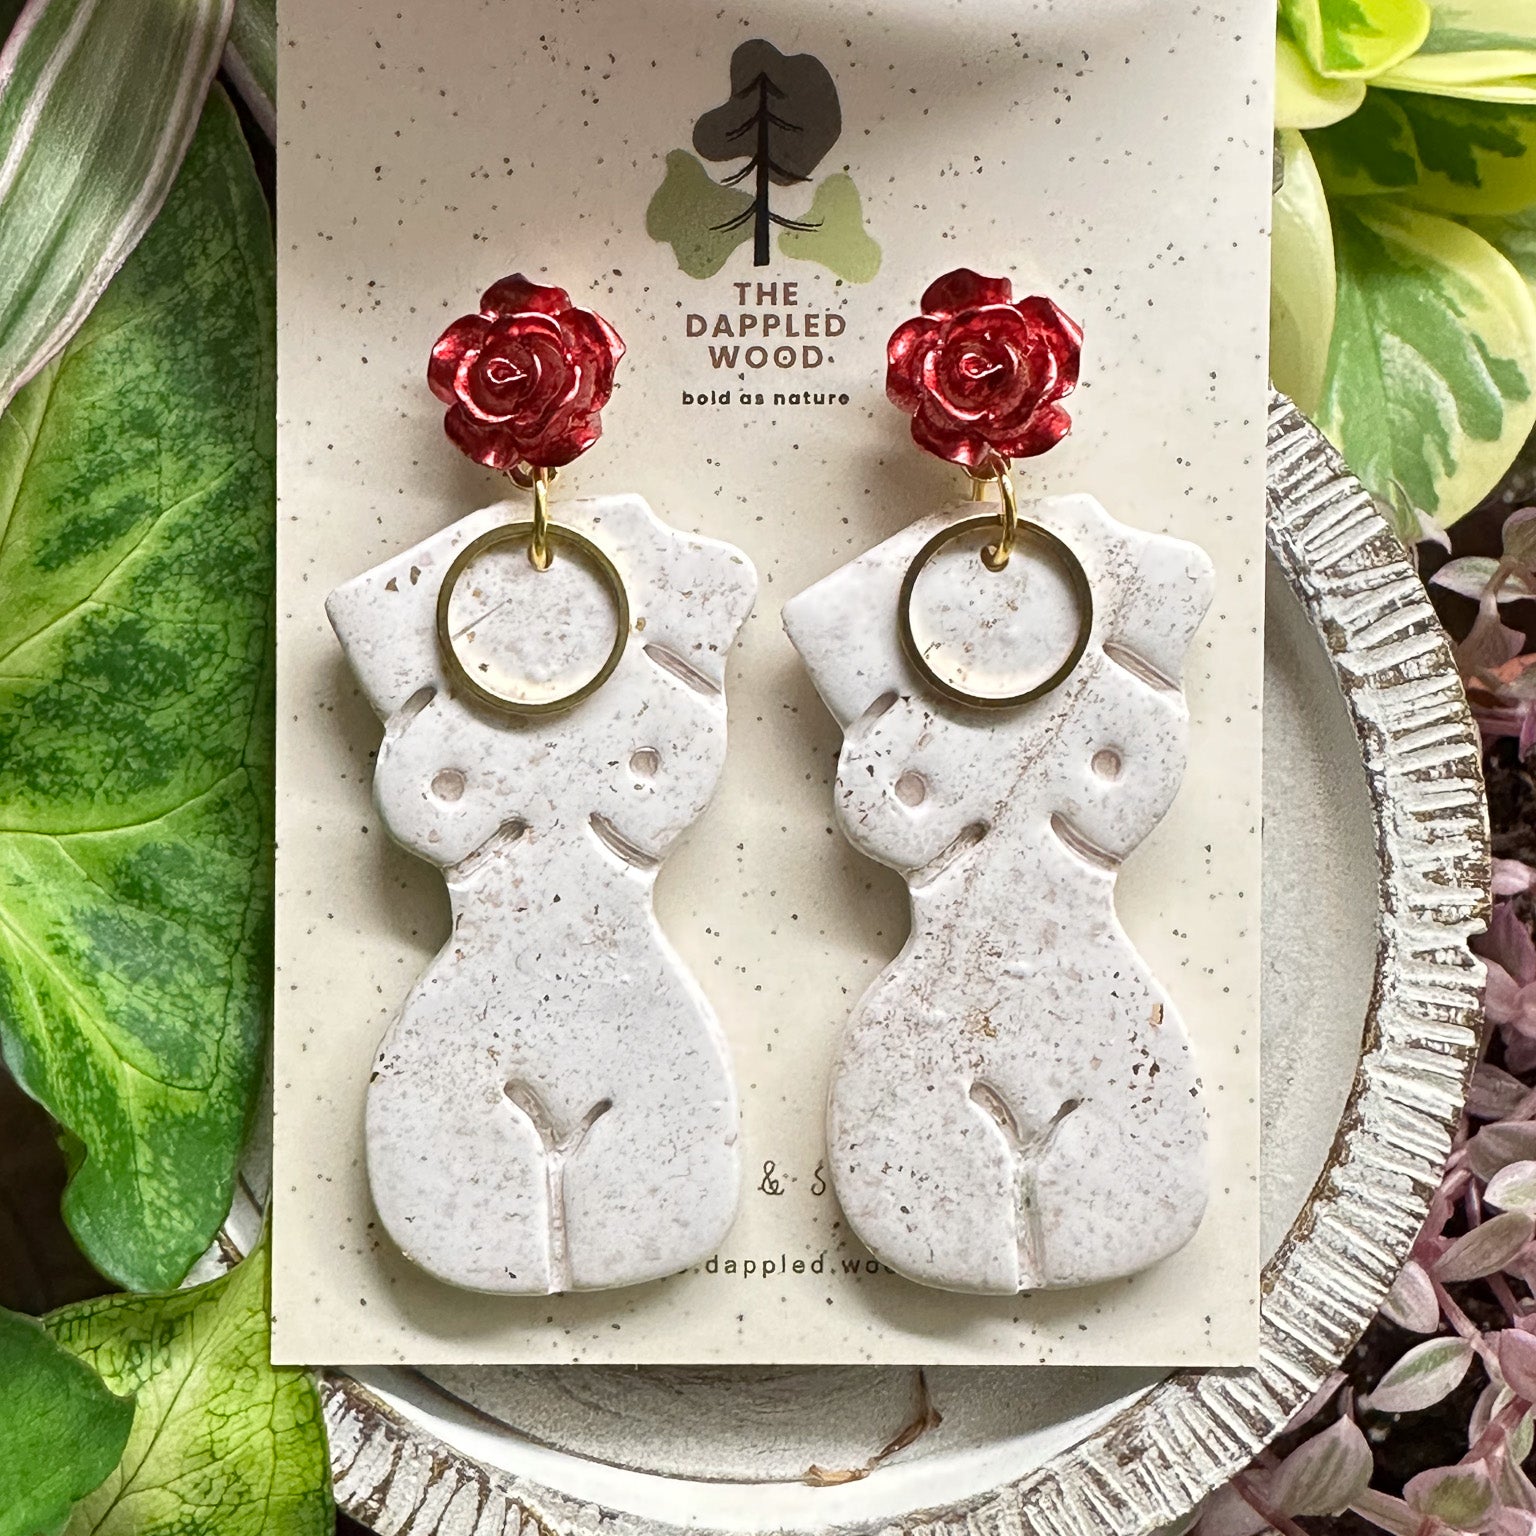 Elegant white polymer clay earrings with gold specks in the shape of a natural, curvy woman with a gold circle pendant, hanging from radiant red and gold rose posts. Earrings are showcased on a branded 'The Dappled Wood' card surrounded by lush greenery.